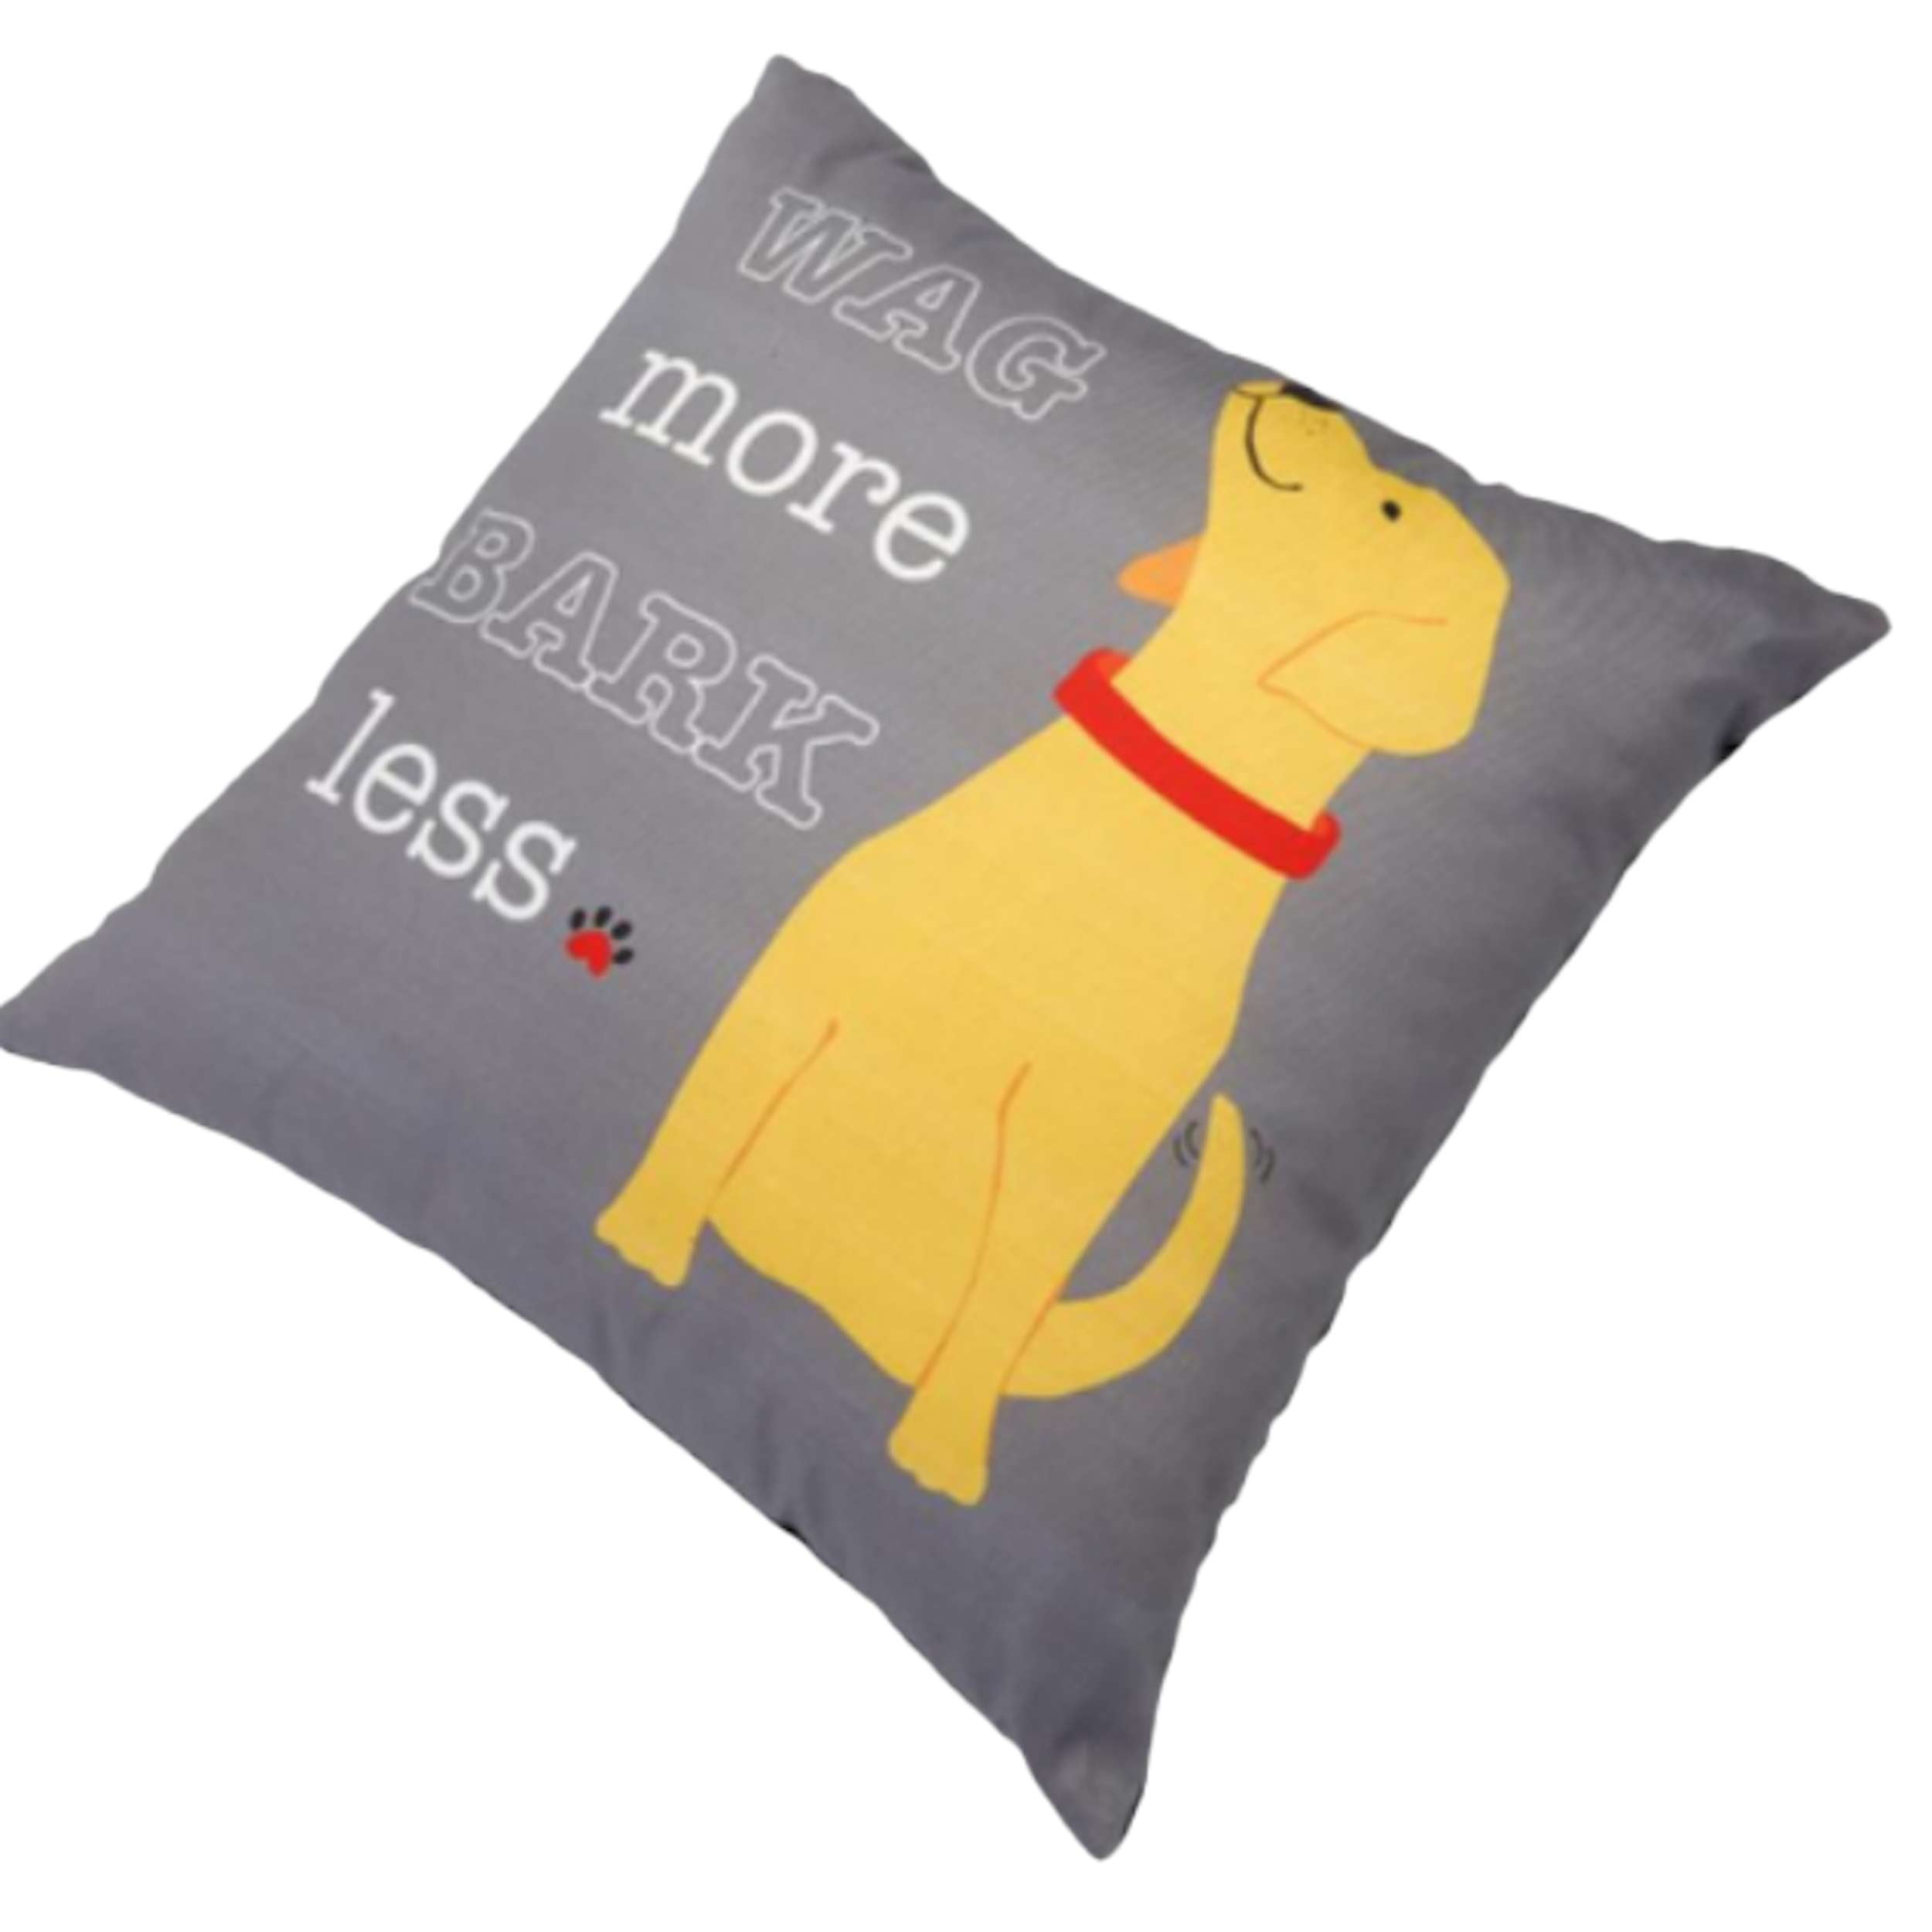 THROW-PILLOW-WAG-MORE-BARK-LESS-DOG-PUPPY